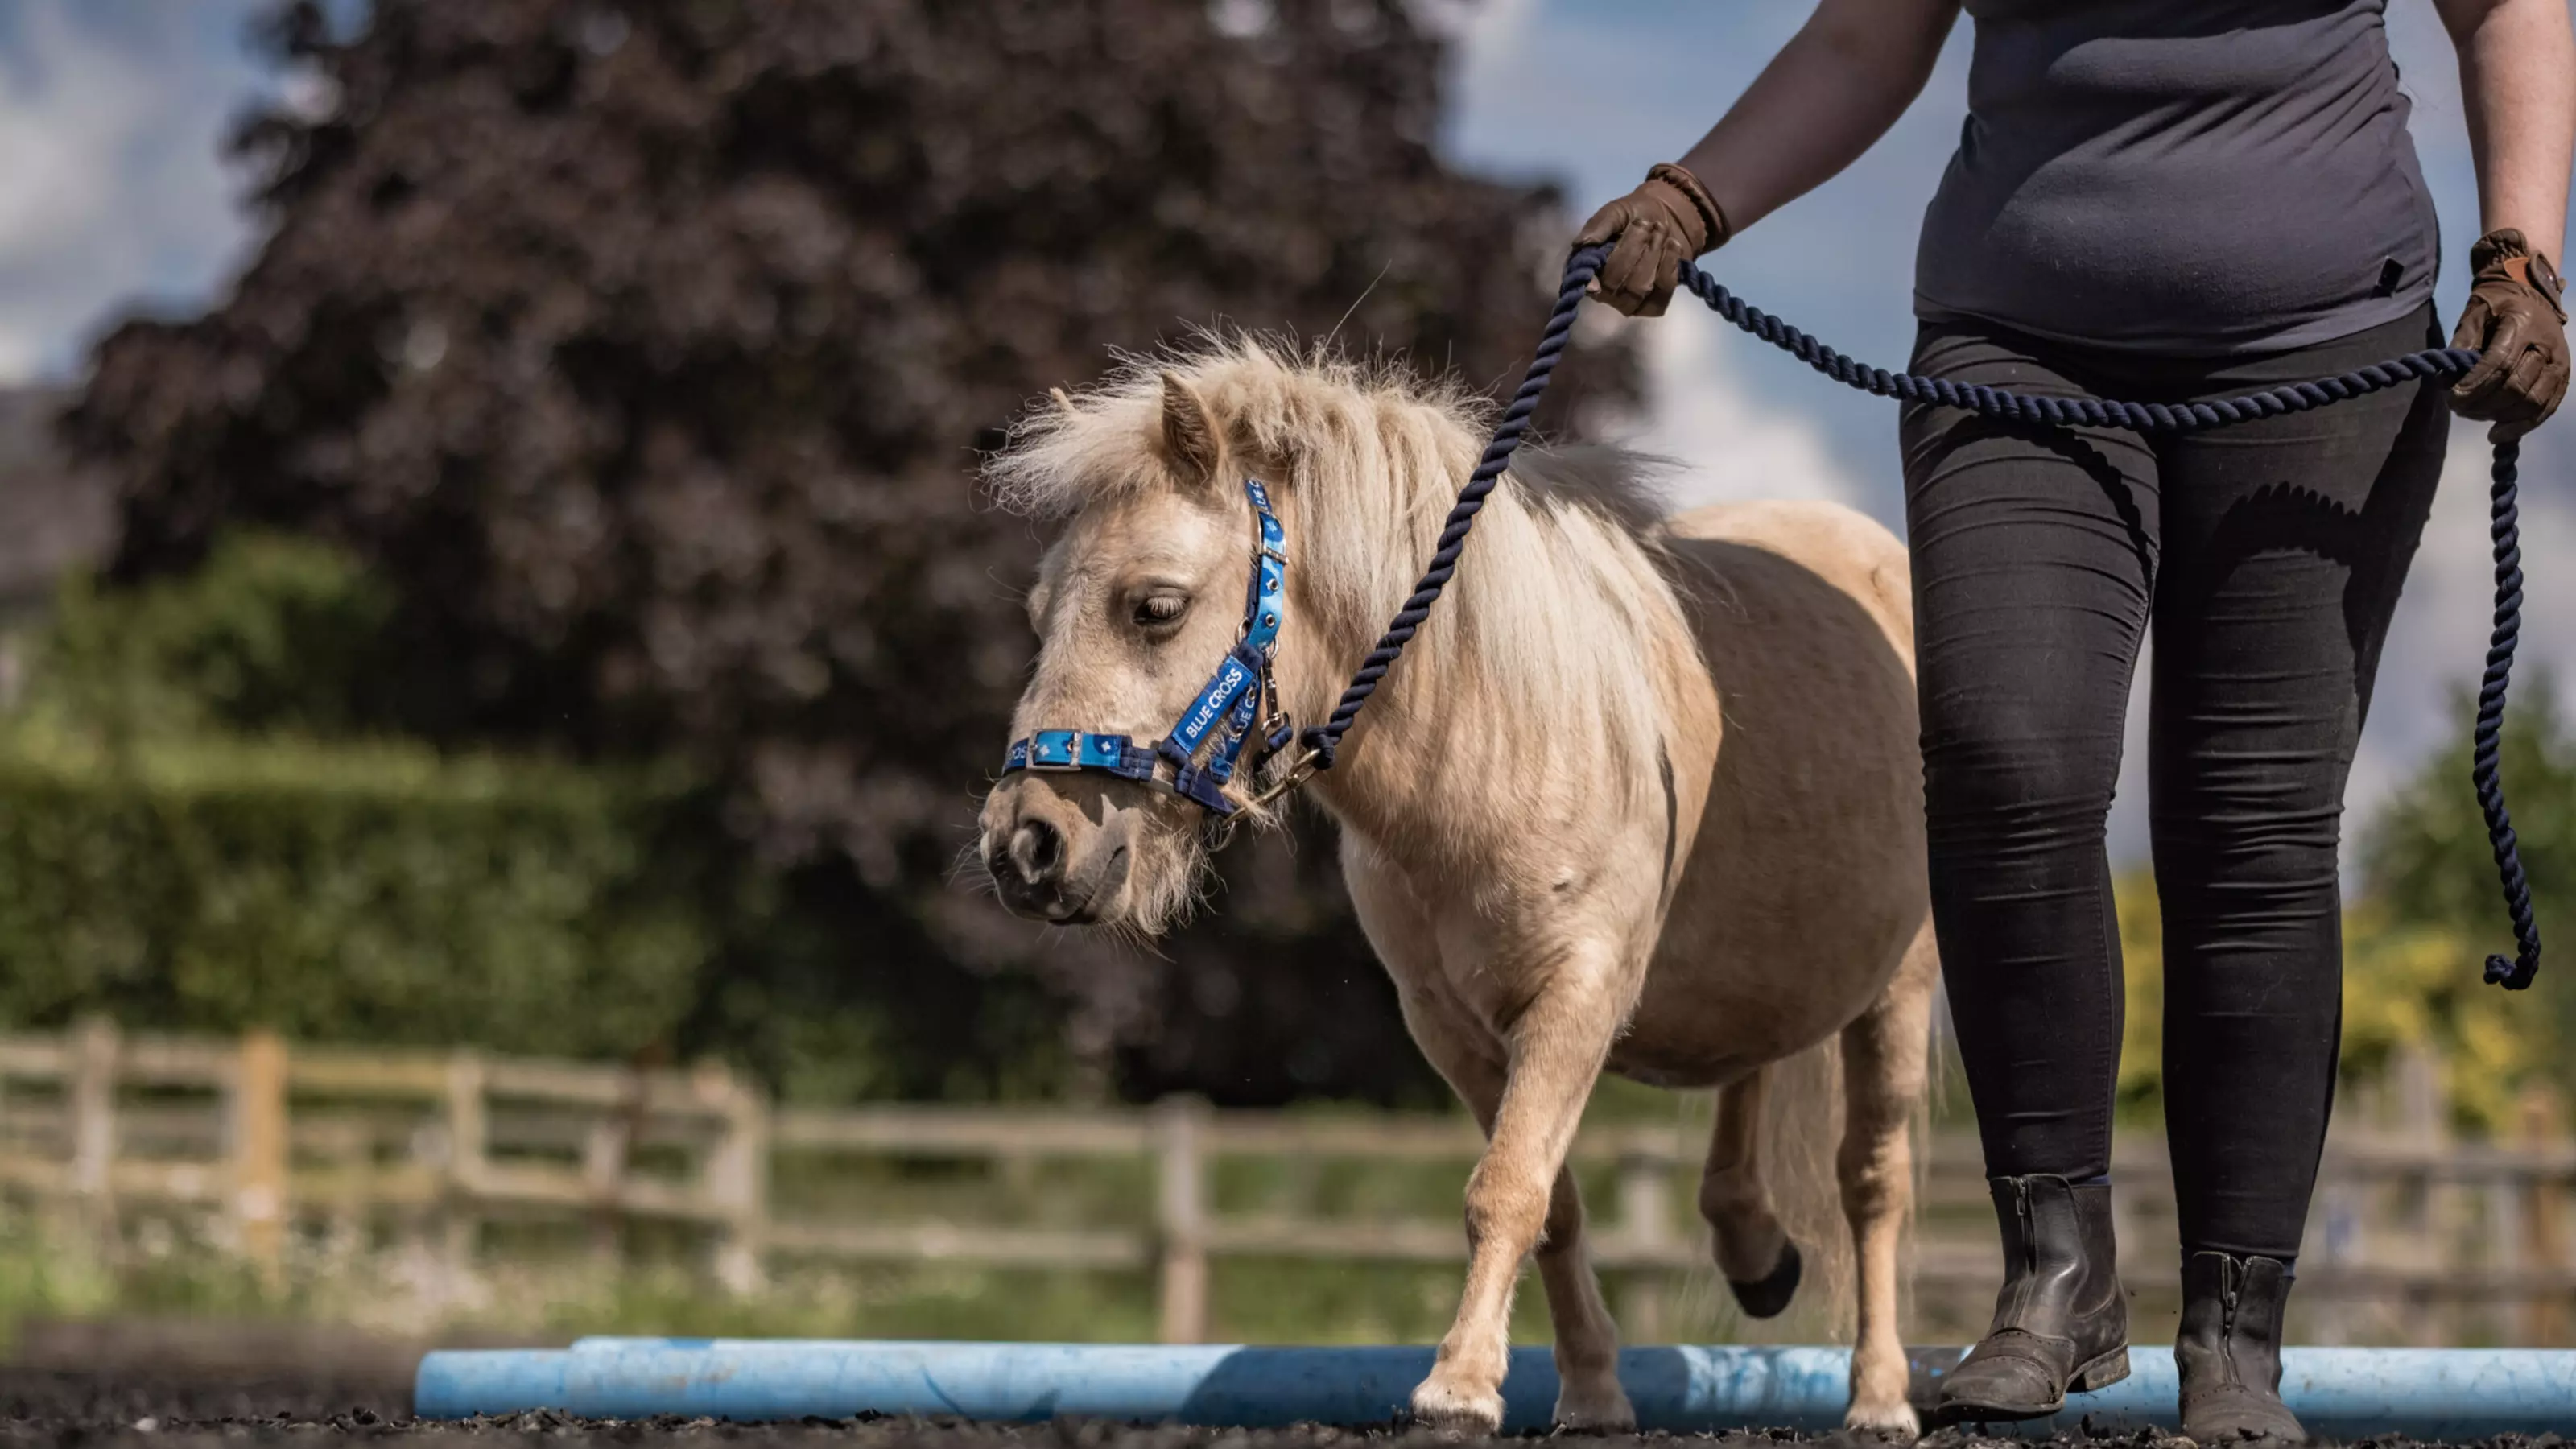 A Shetland pony practices walking over poles with their handler.